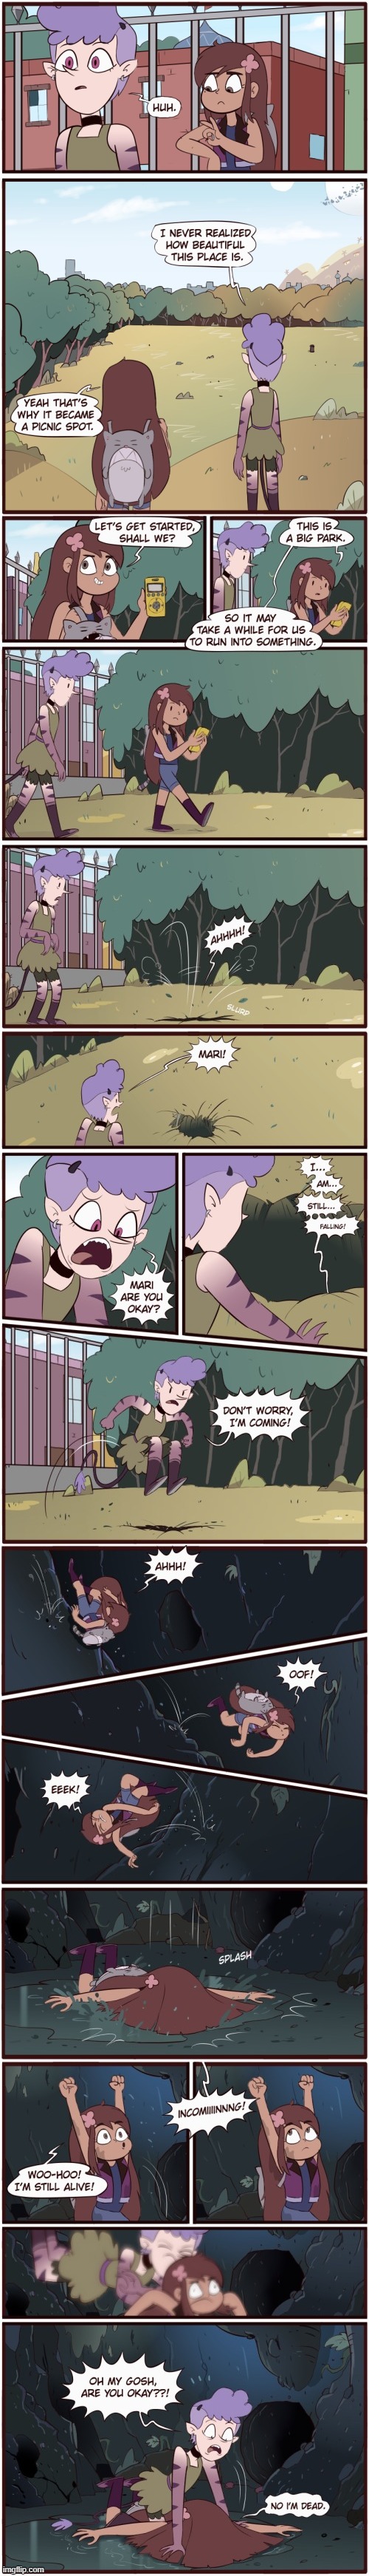 Echo Creek: A Tale of Two Butterflies: Chapter 2: The Half Way (Part 9) | image tagged in morningmark,svtfoe,comics/cartoons,star vs the forces of evil,comics,memes | made w/ Imgflip meme maker